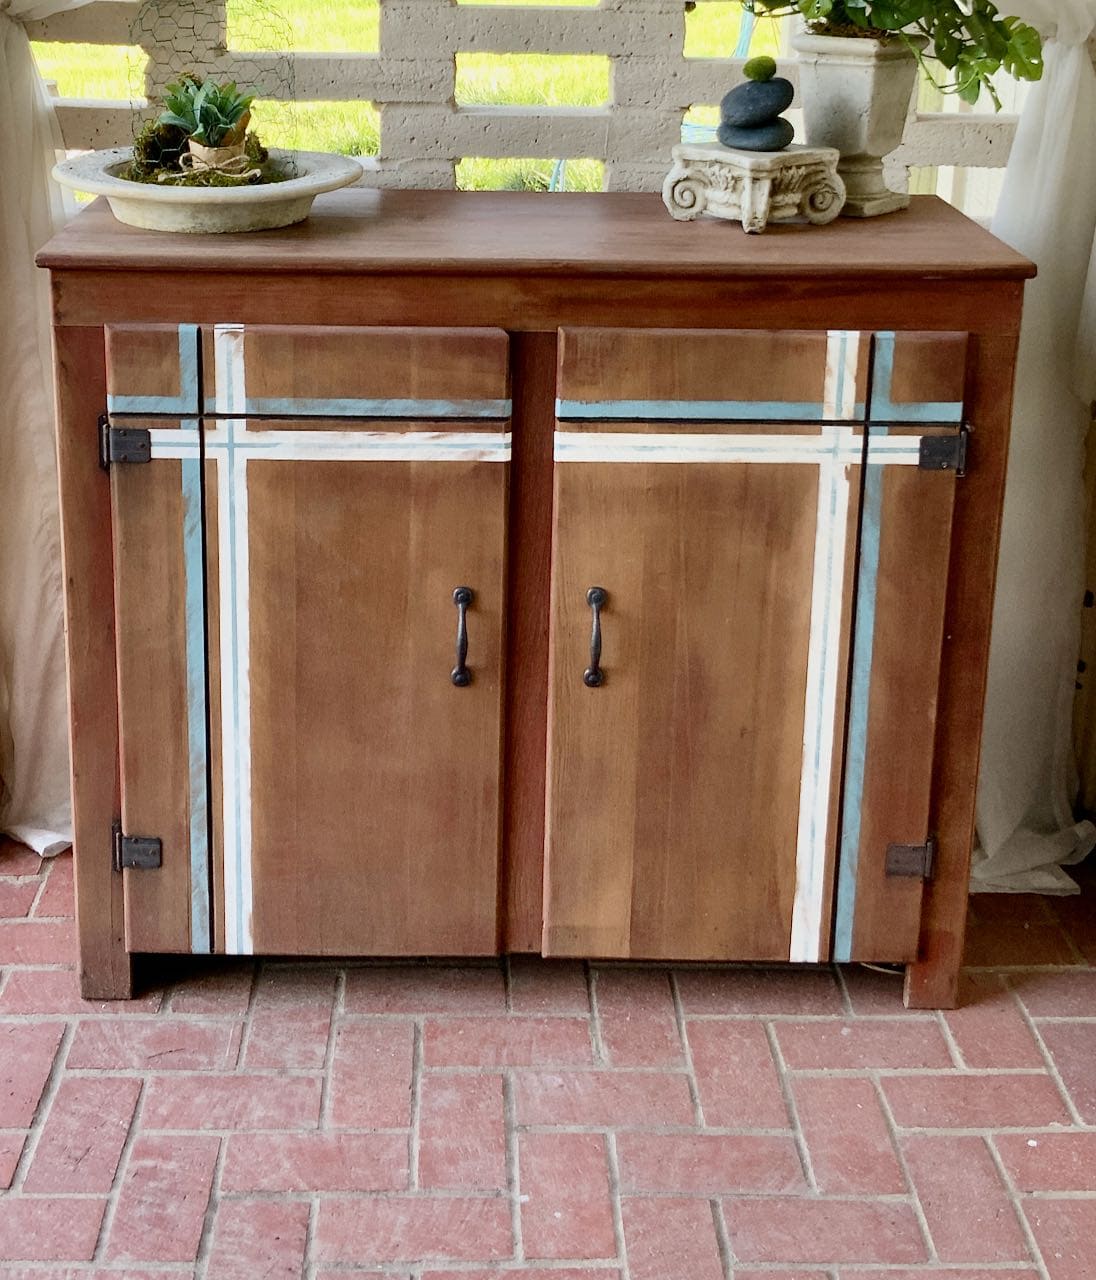 Vintage wood cabinet with plaid accent stripes added 